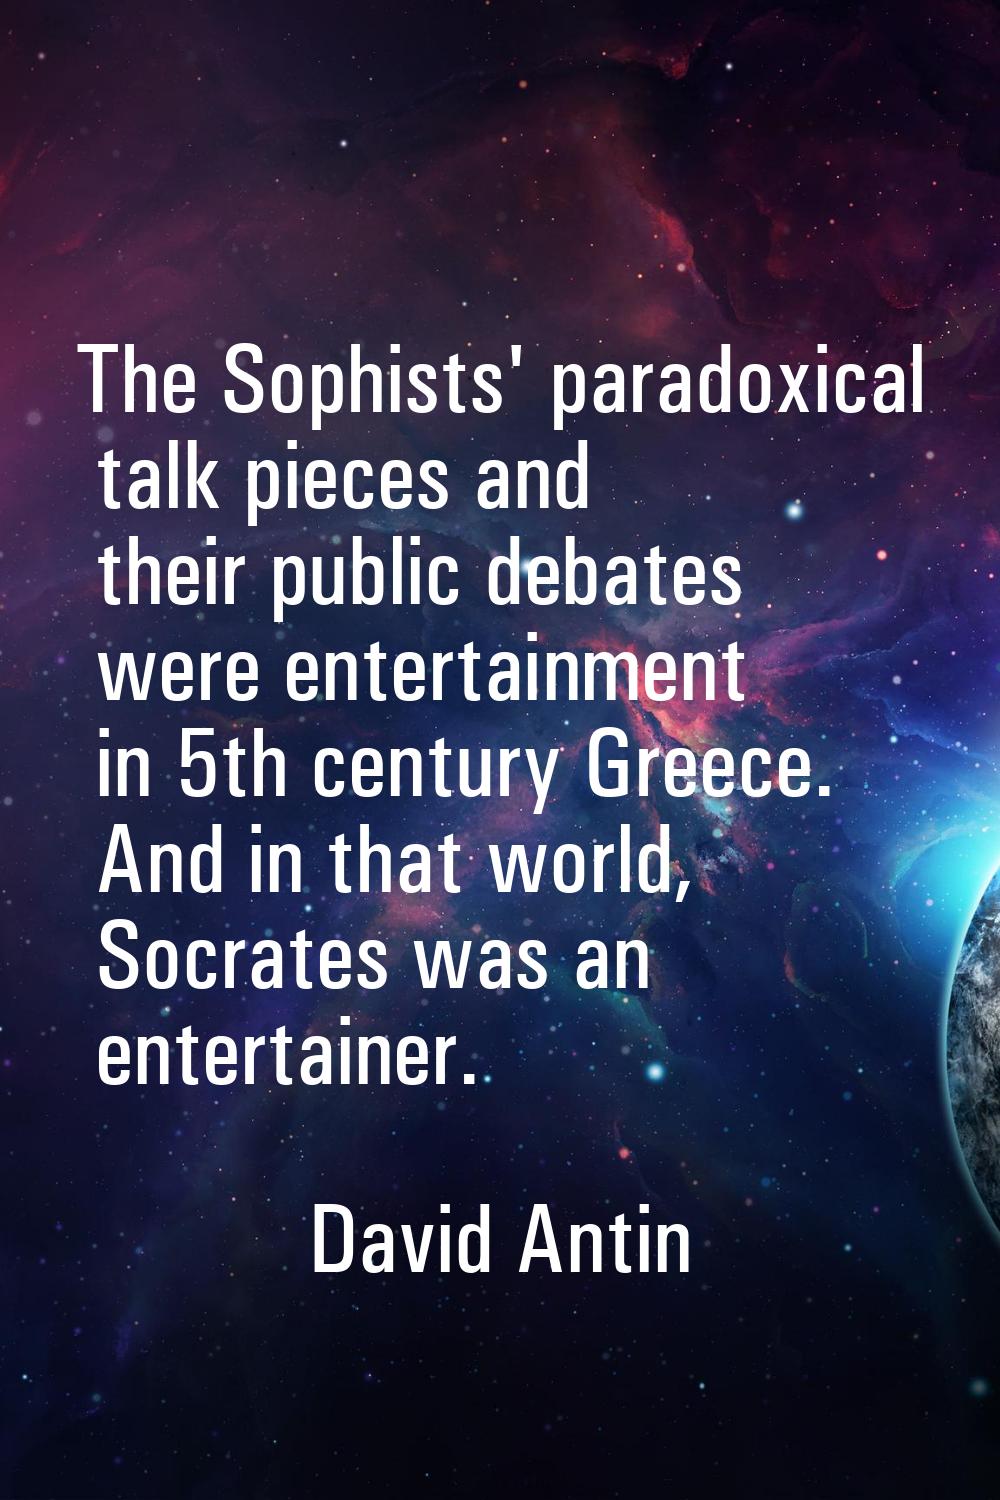 The Sophists' paradoxical talk pieces and their public debates were entertainment in 5th century Gr